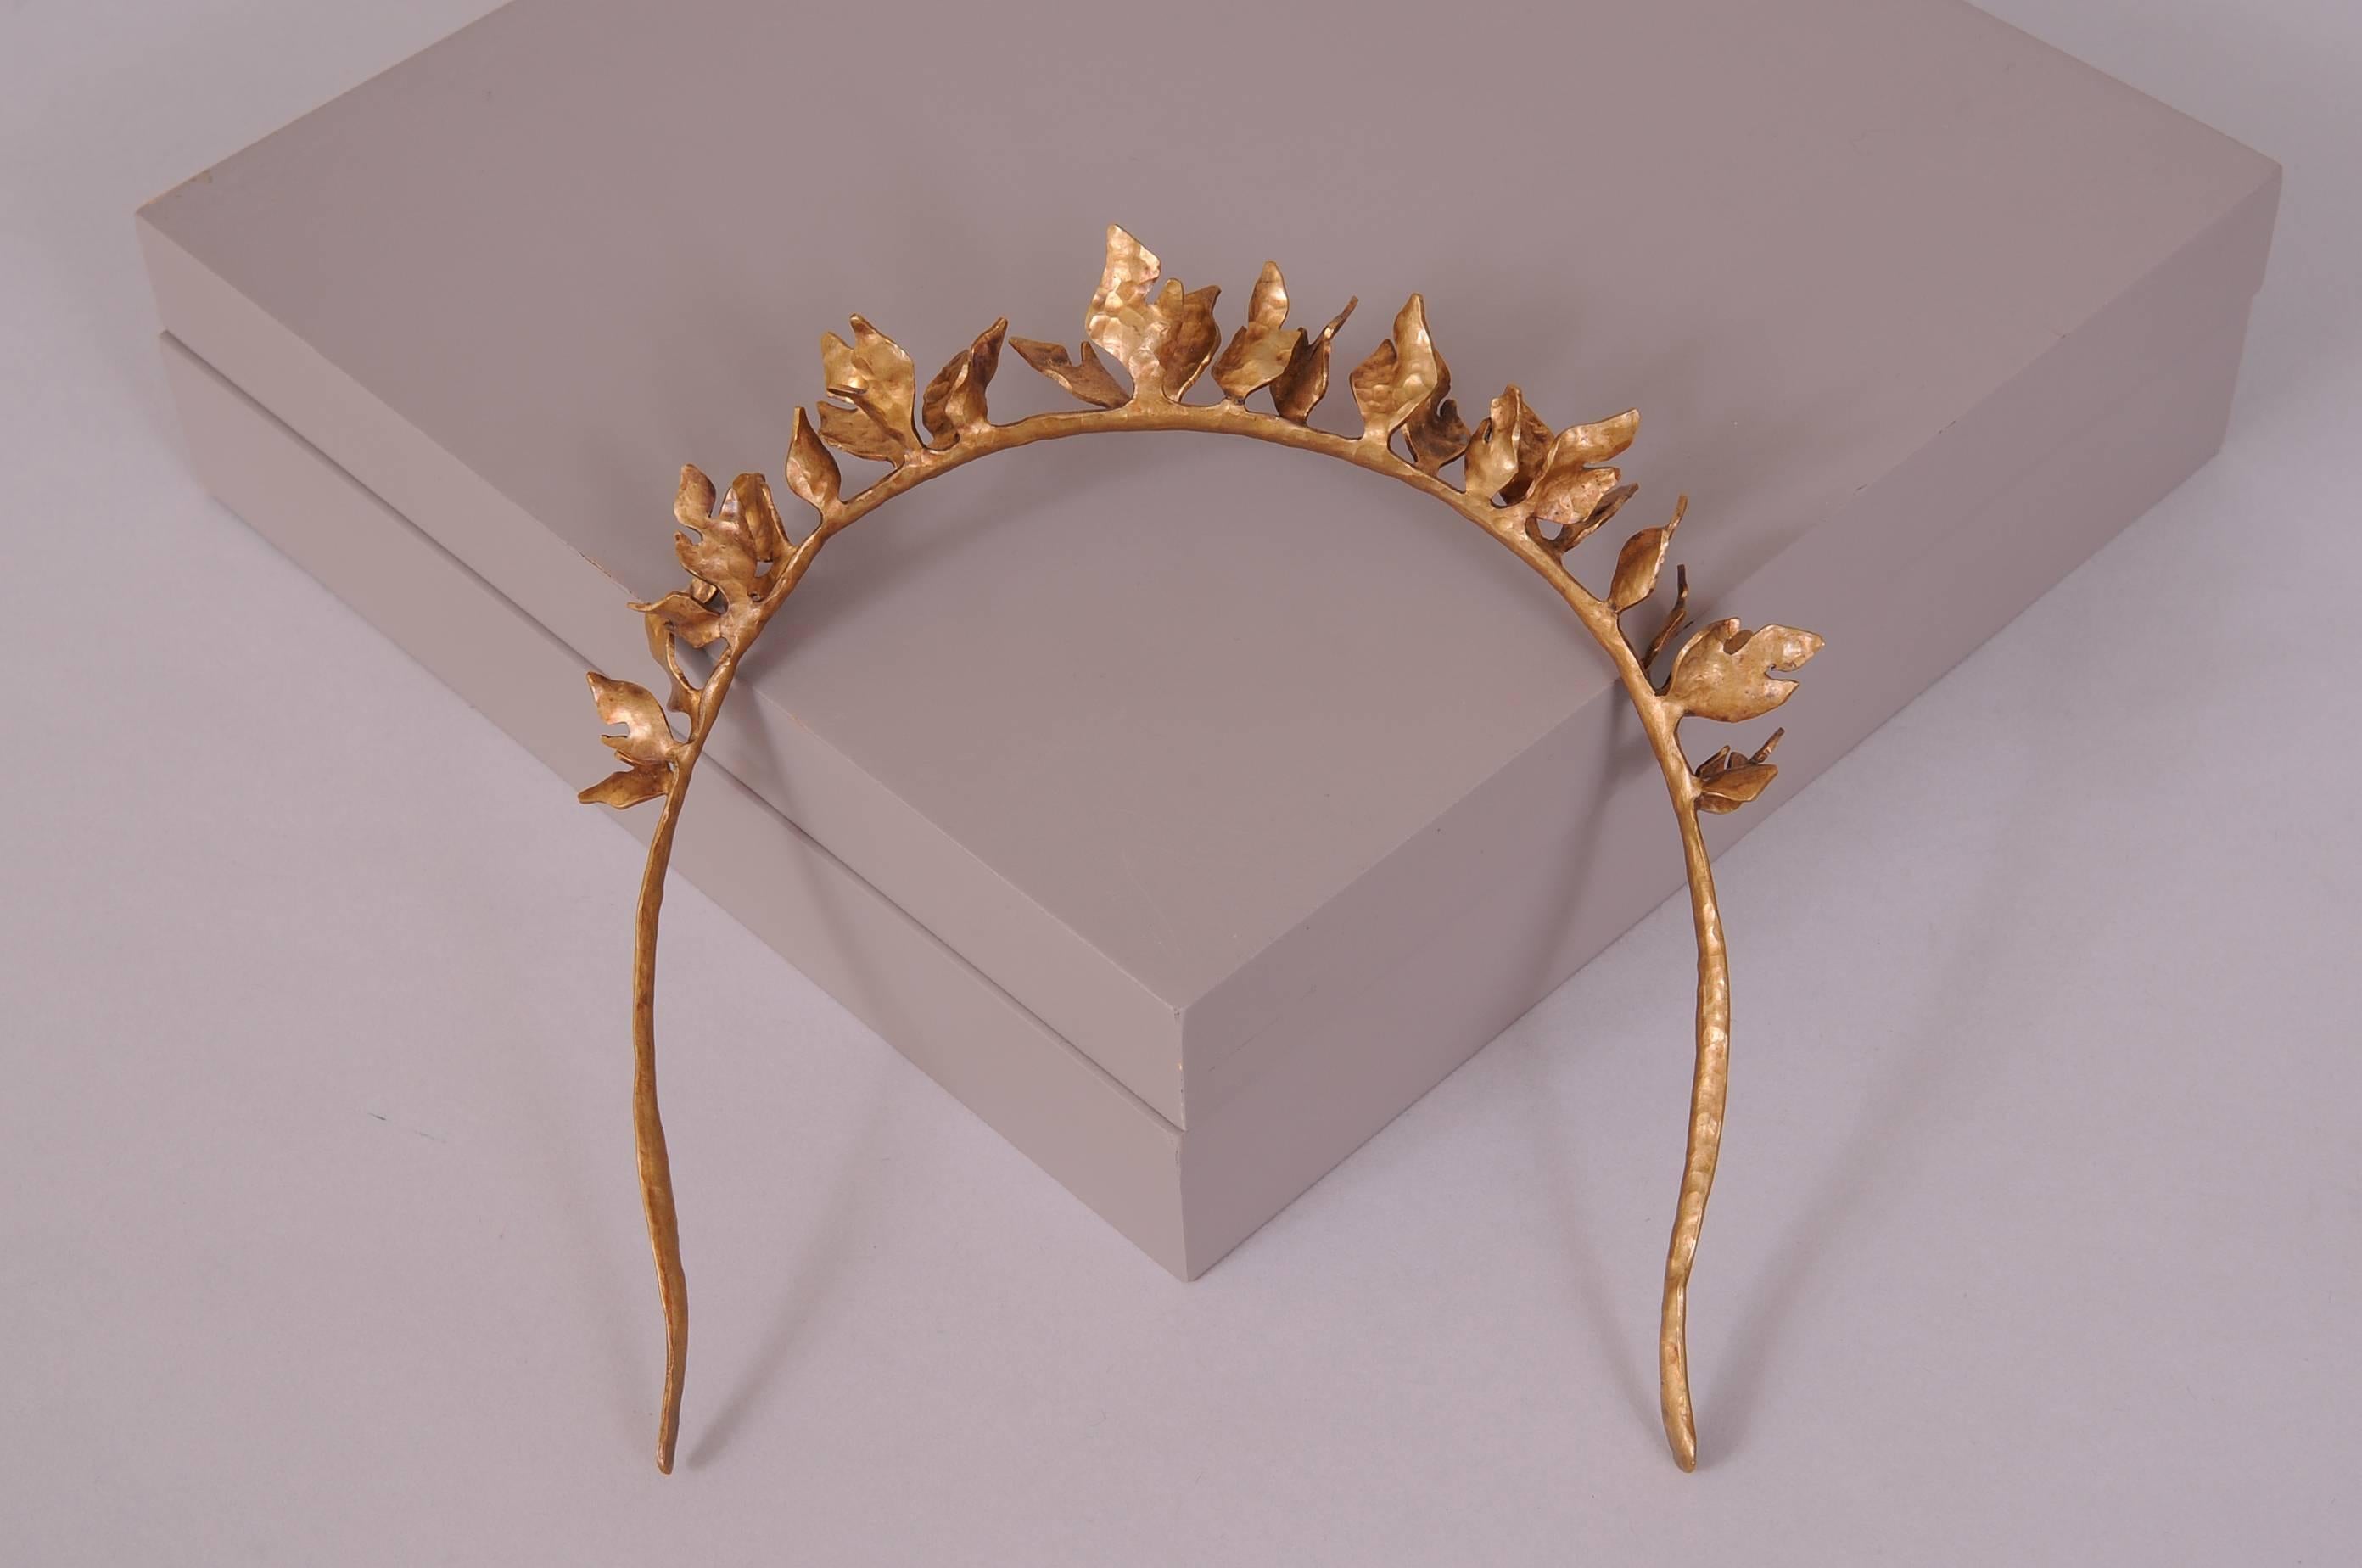 The grand daughter of Antonio Castillo and the daughter of Emilia Castillo, Christina Romo is a well regarded designer in her own right. This innovative design for a tiara or headband is made from tumbaga, an alloy of gold and copper. that was also